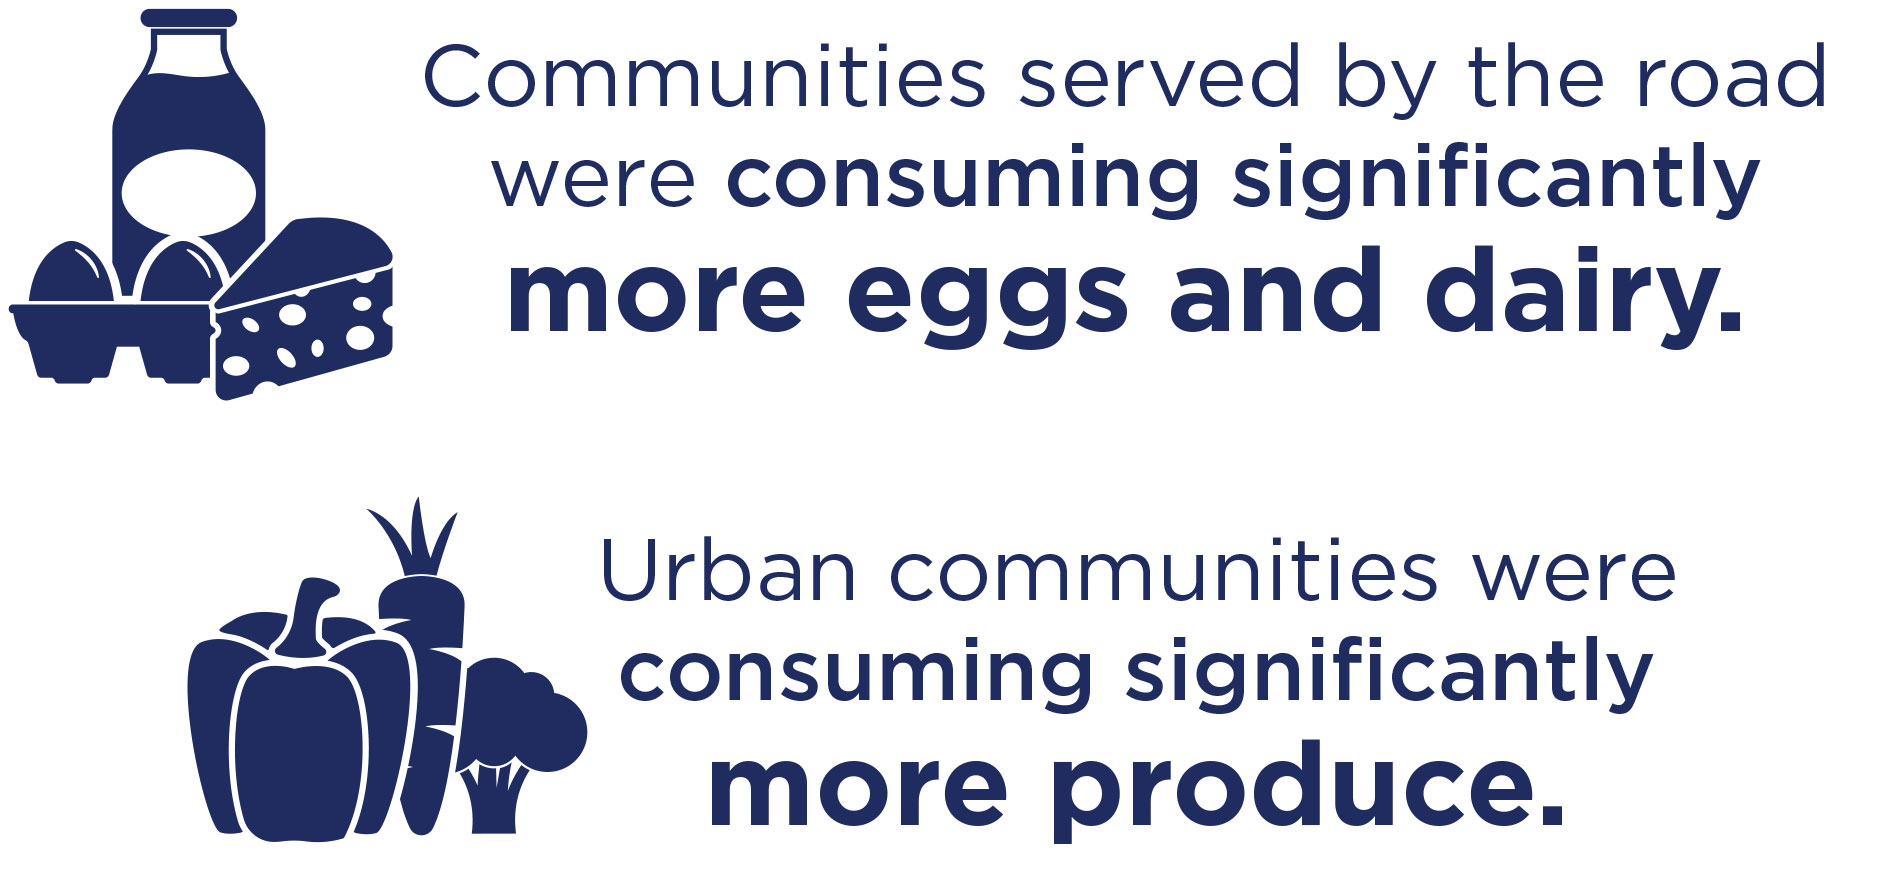 Communities served by the road were consuming more eggs, dairy and produce.